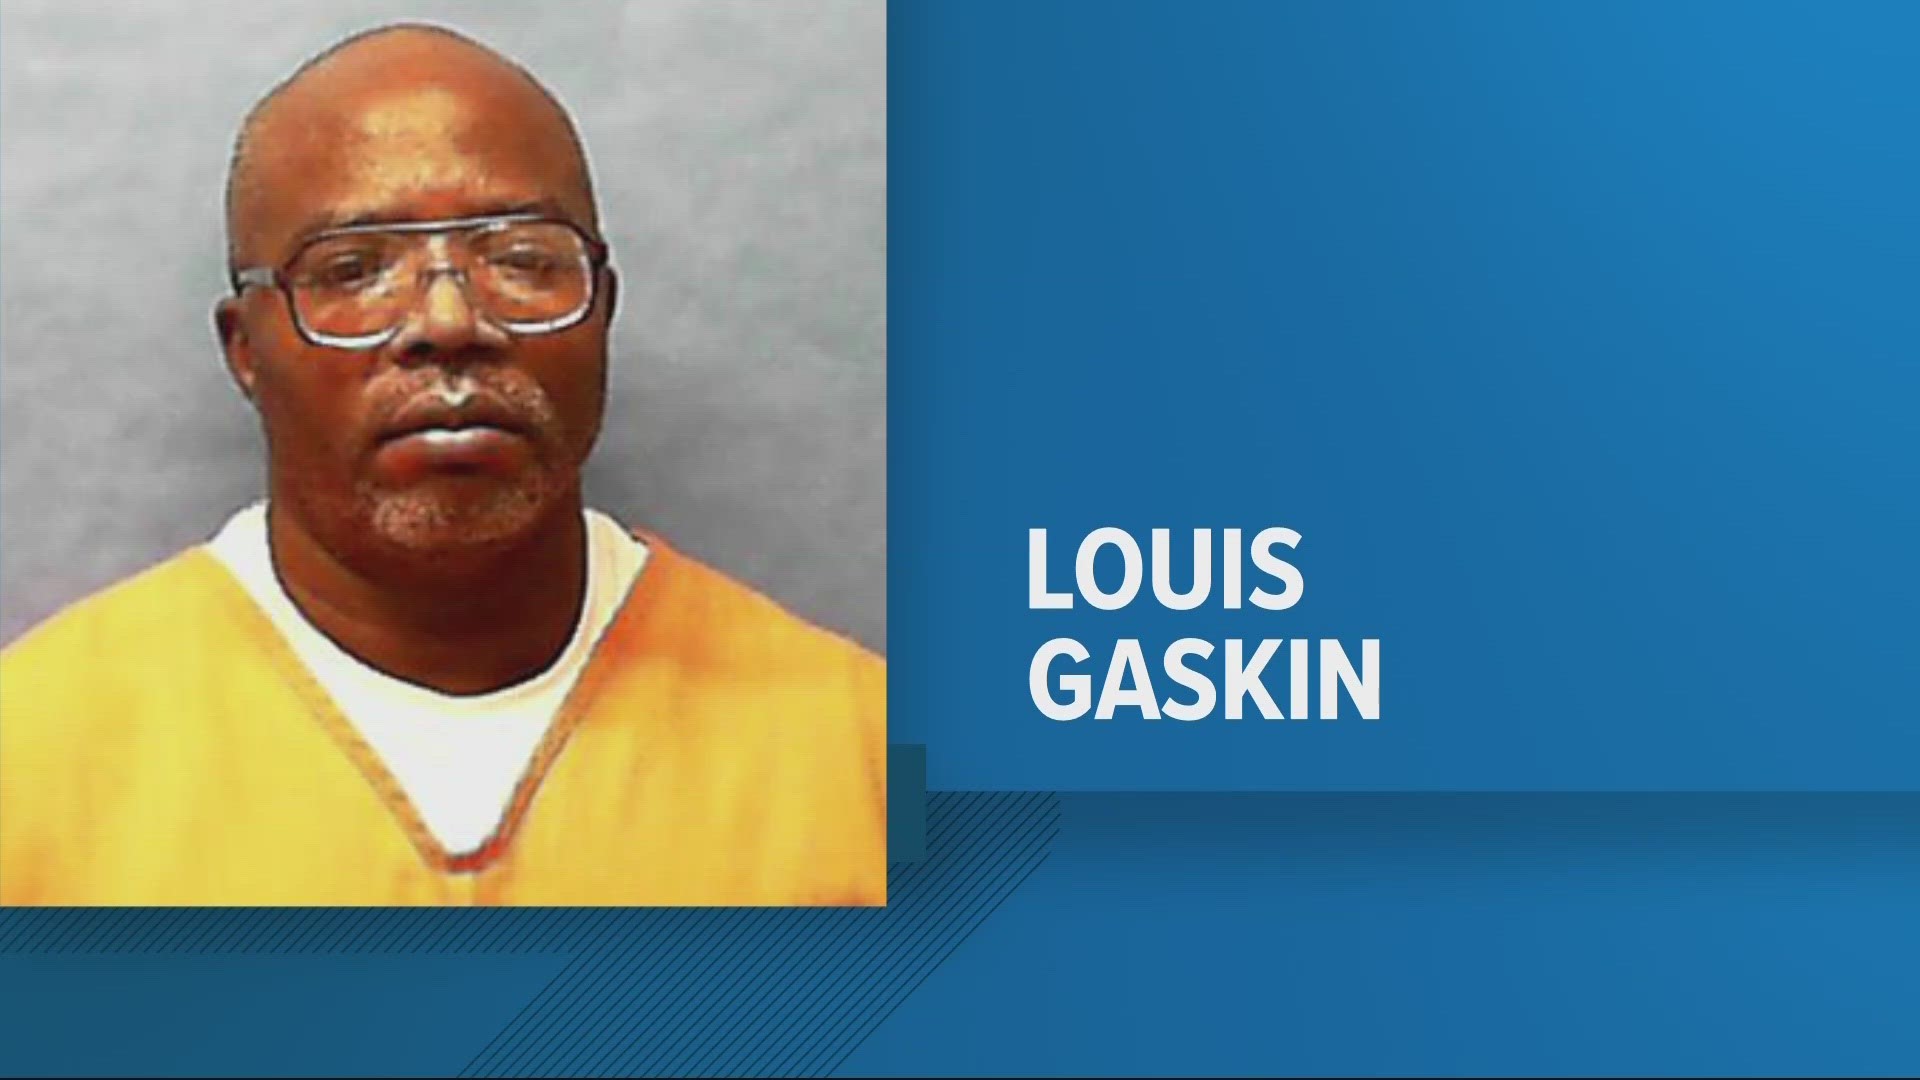 Louis Gaskin, 56, is scheduled to die at 6 p.m. Wednesday for what he did Dec. 20, 1989 in Bunnell.